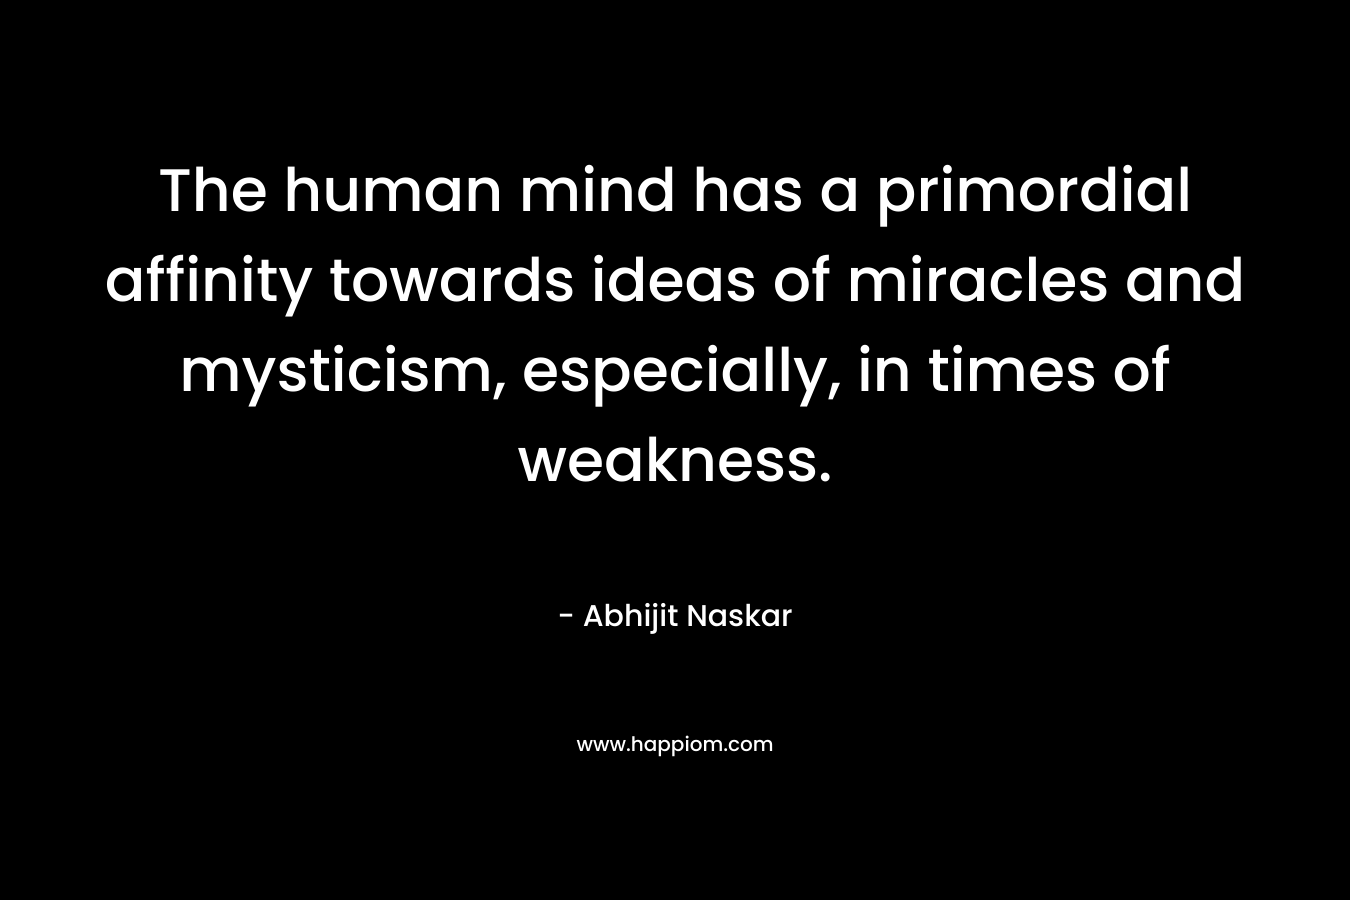 The human mind has a primordial affinity towards ideas of miracles and mysticism, especially, in times of weakness.